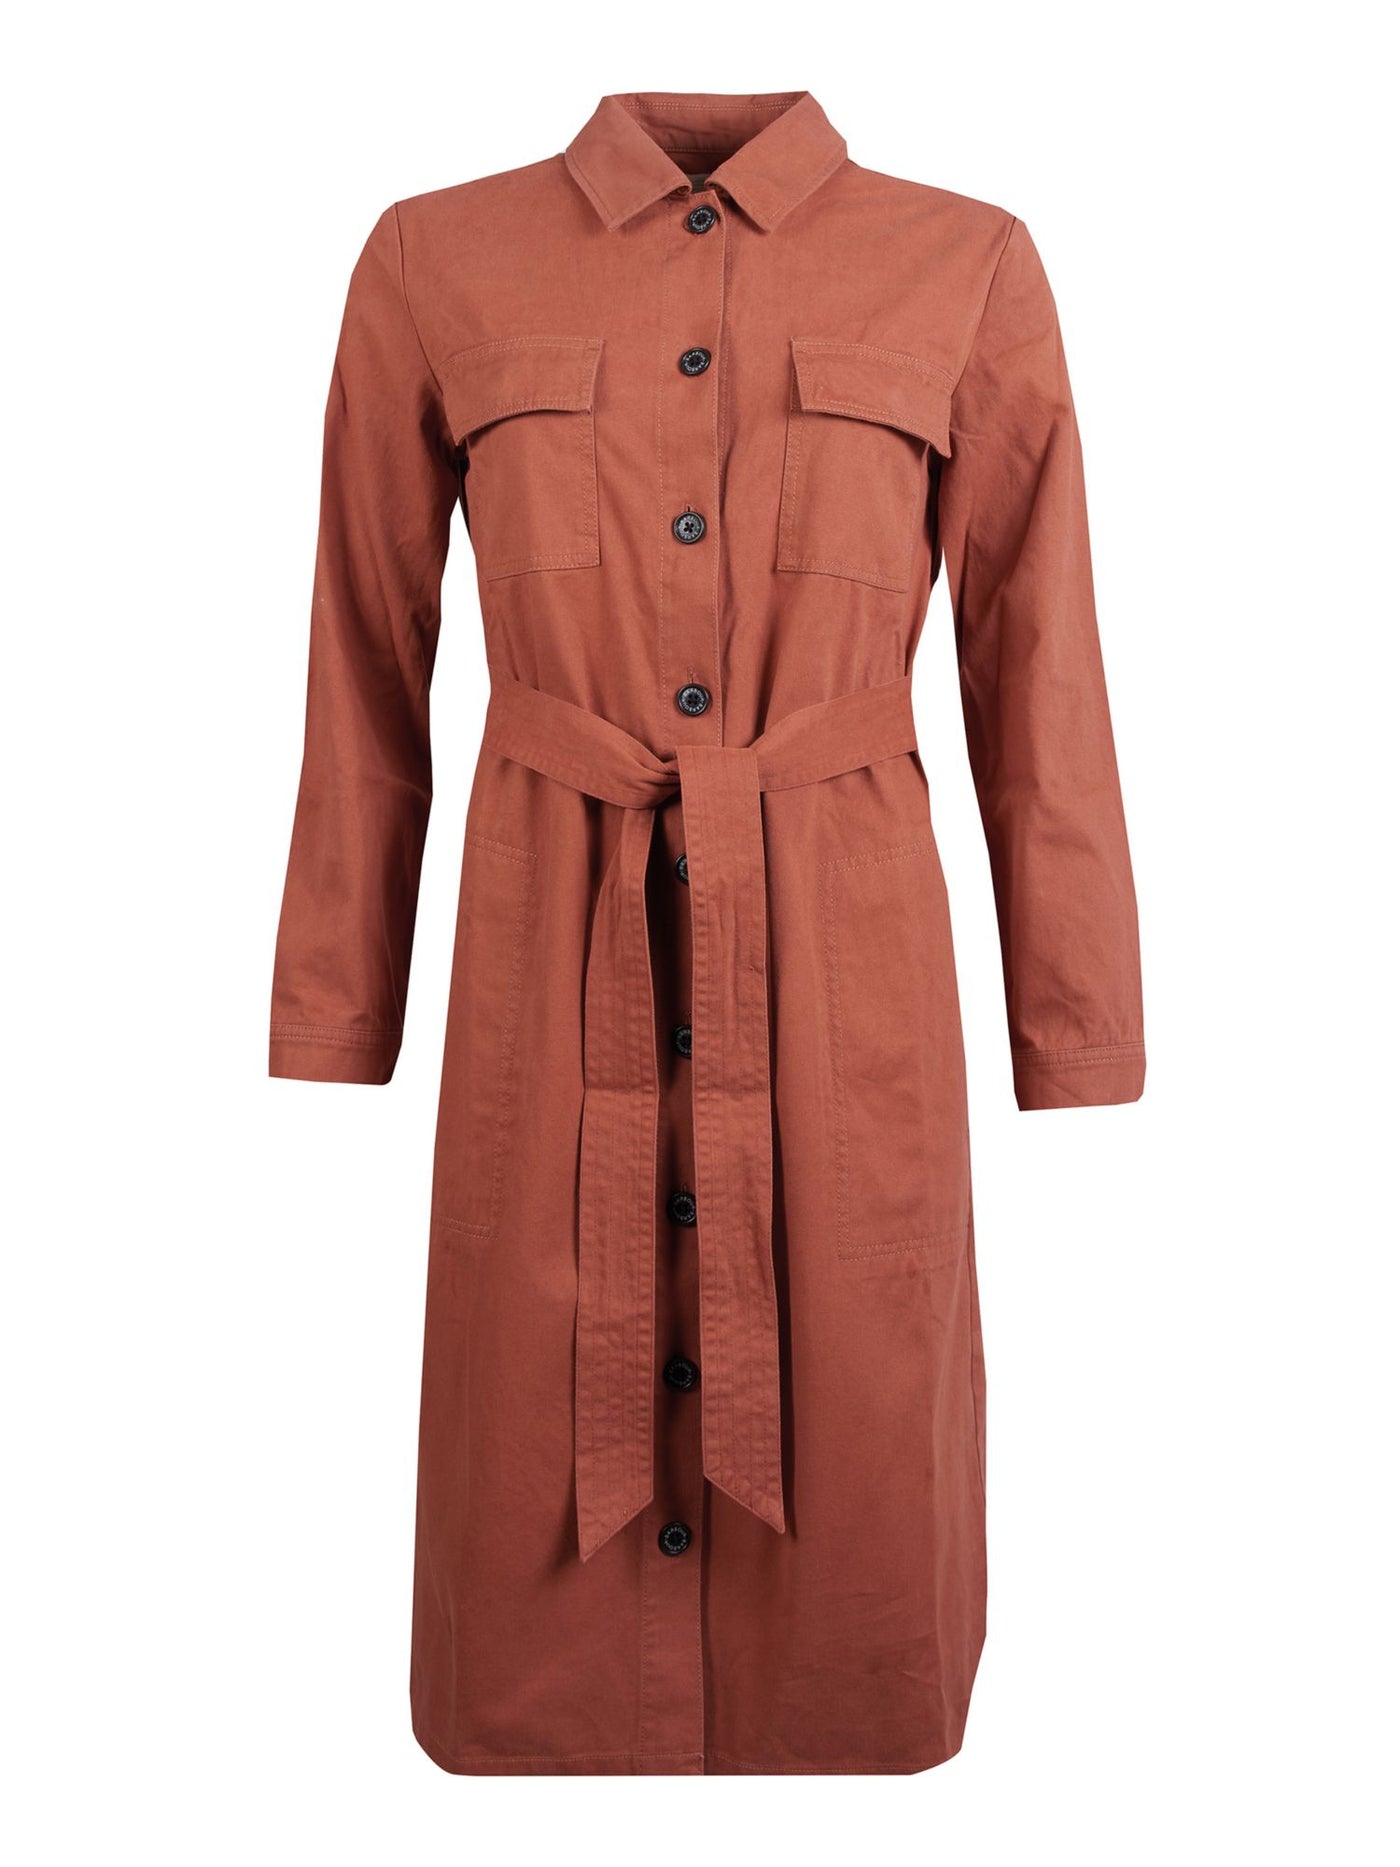 BARBOUR Womens Brown Tie Long Sleeve Collared Midi Shirt Dress 6